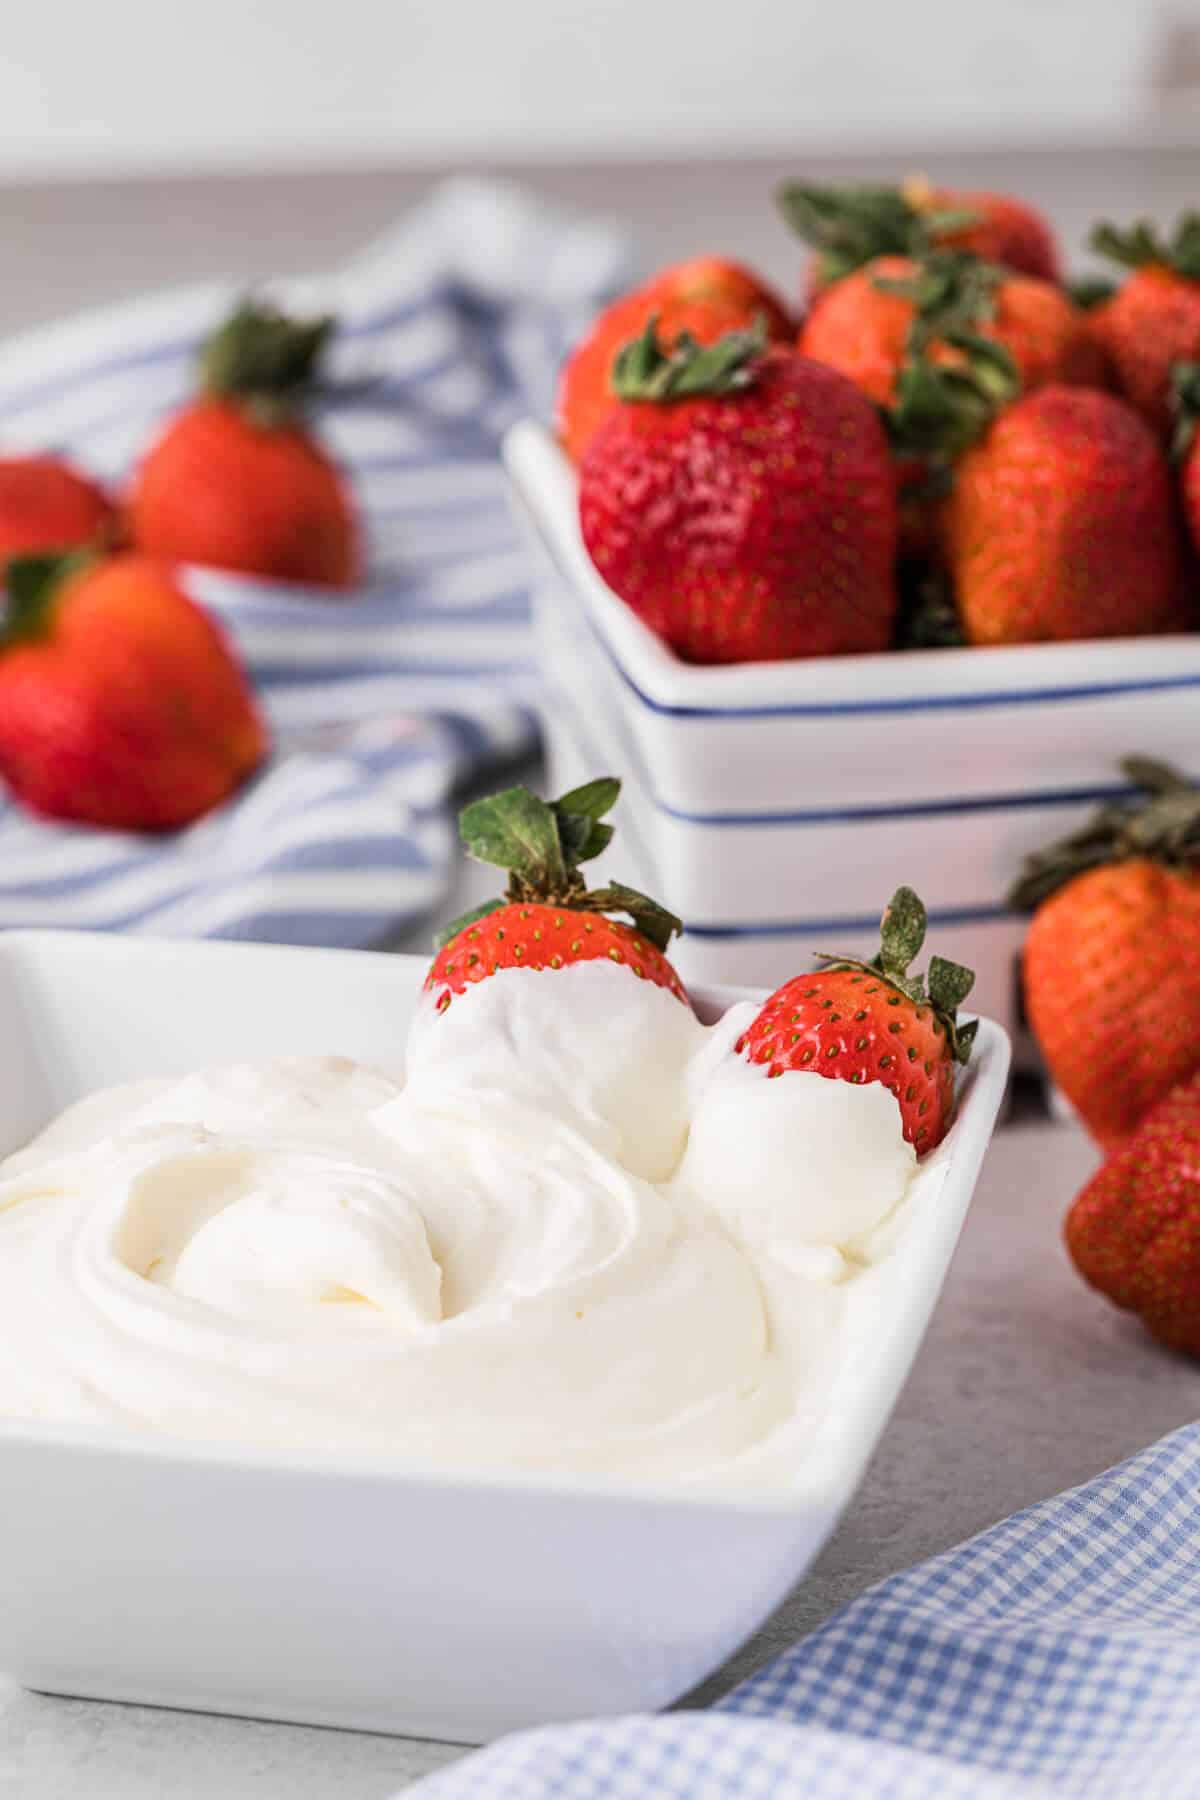 A bowl of stabilized whipped cream with strawberries in it.